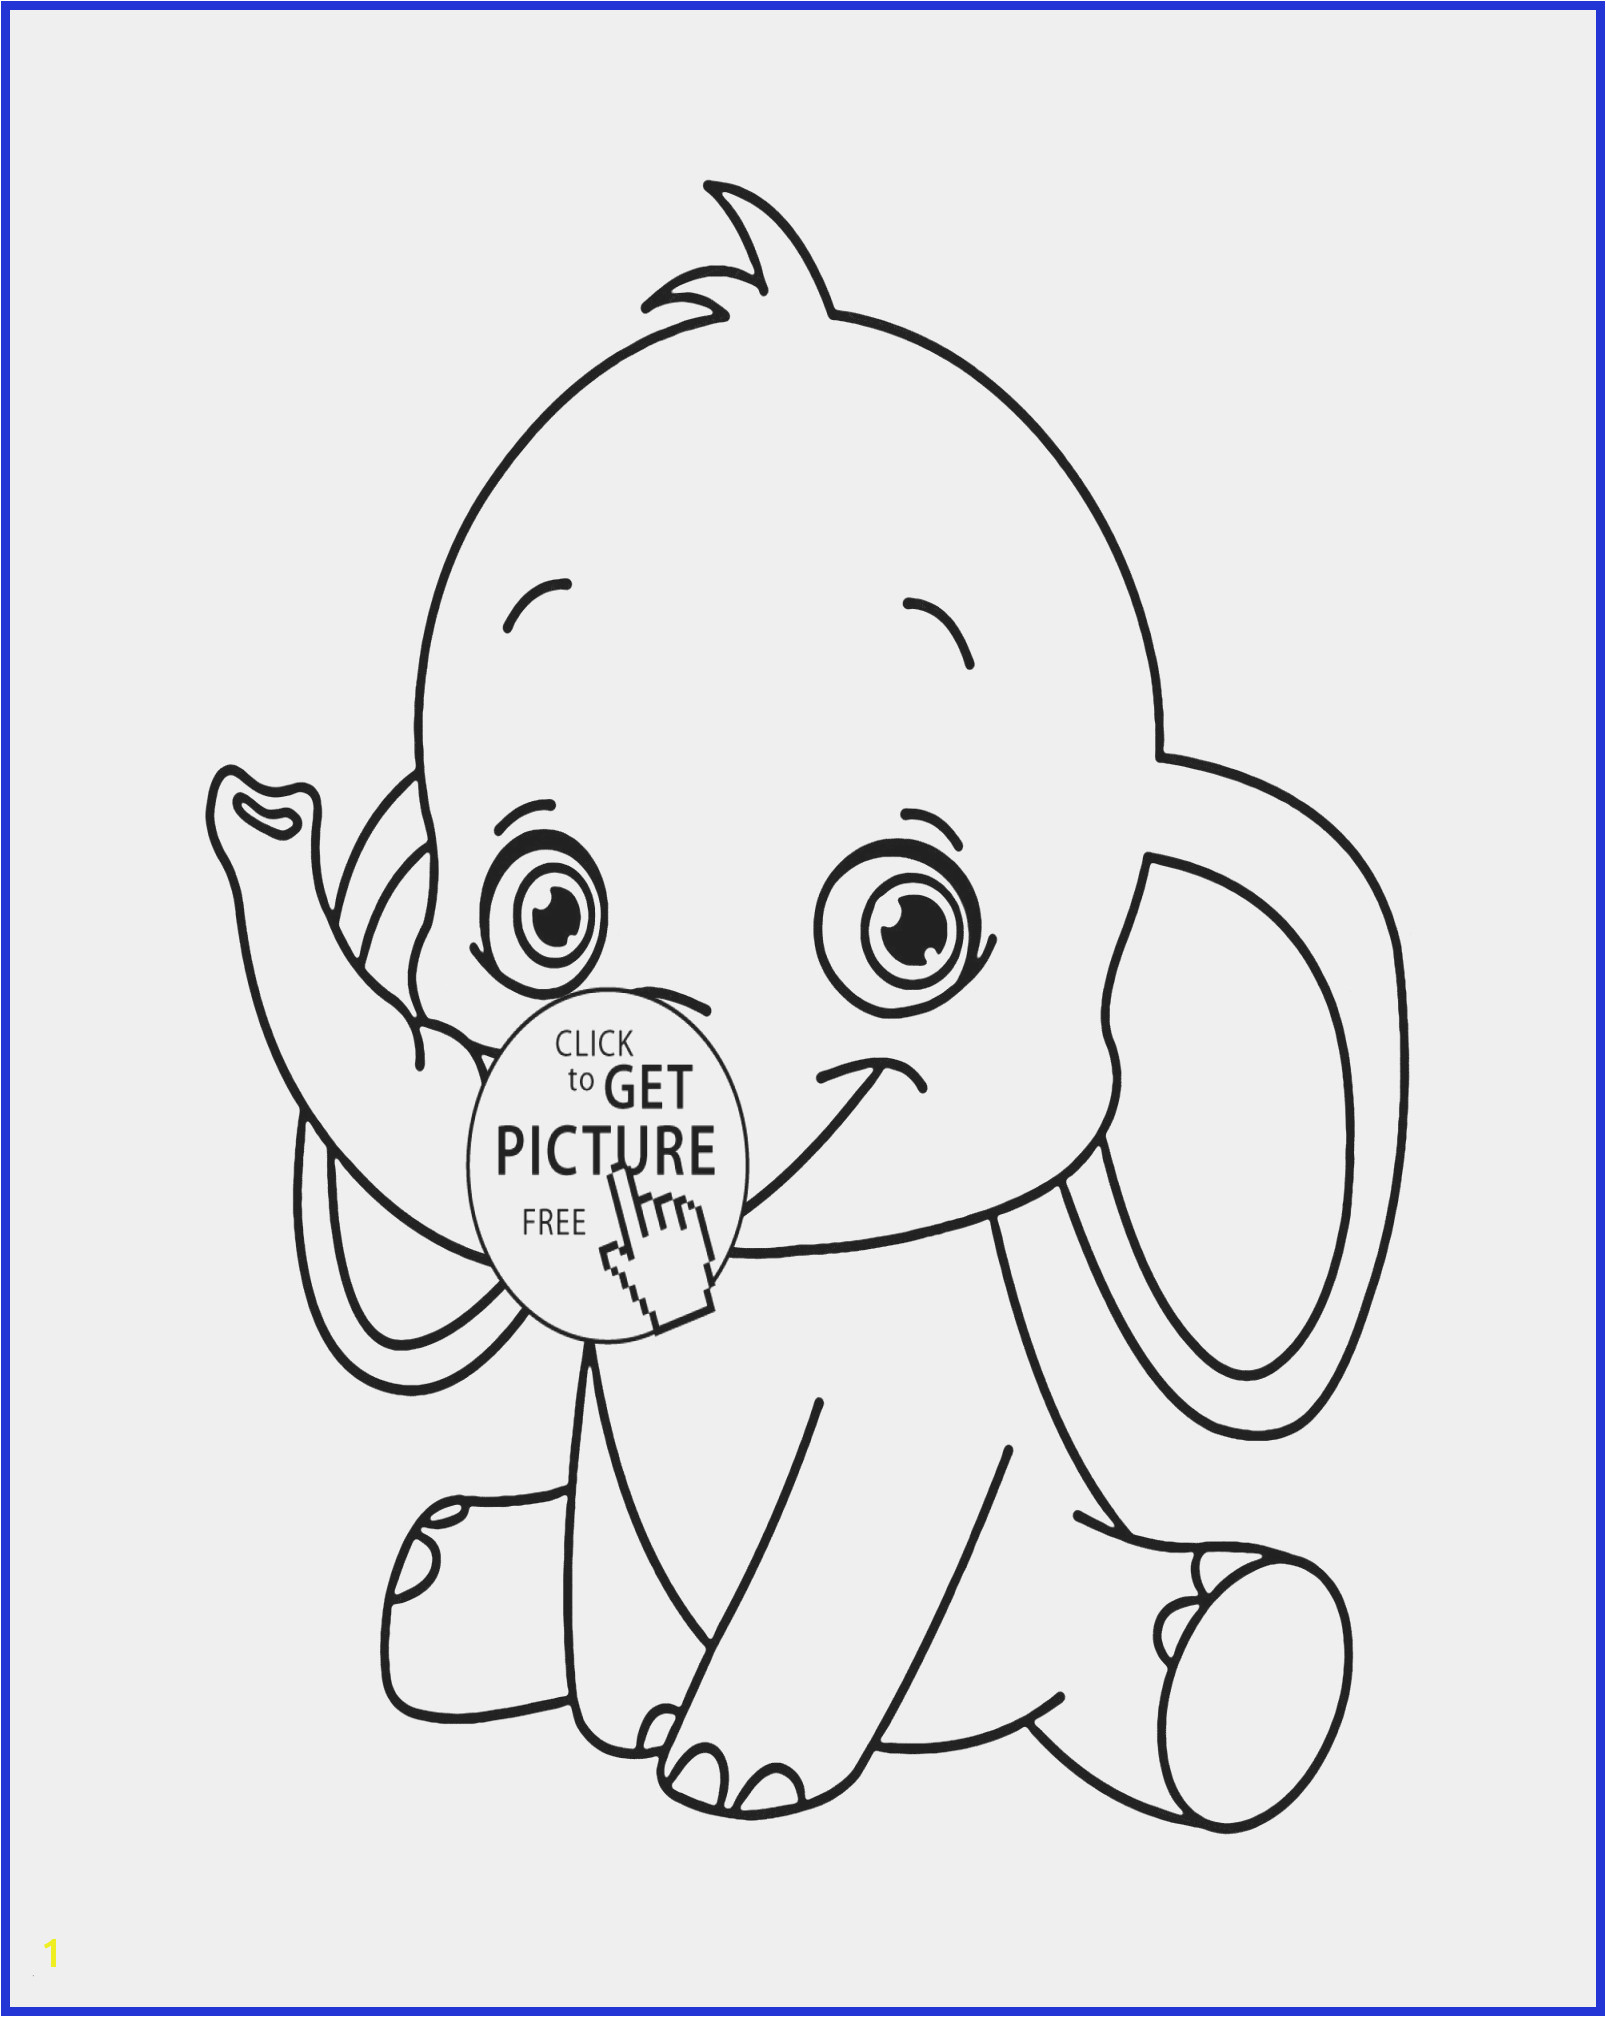 Free Animal Coloring Pages for Kids Cute Baby Animal Coloring Pages Unique Fresh Home Coloring